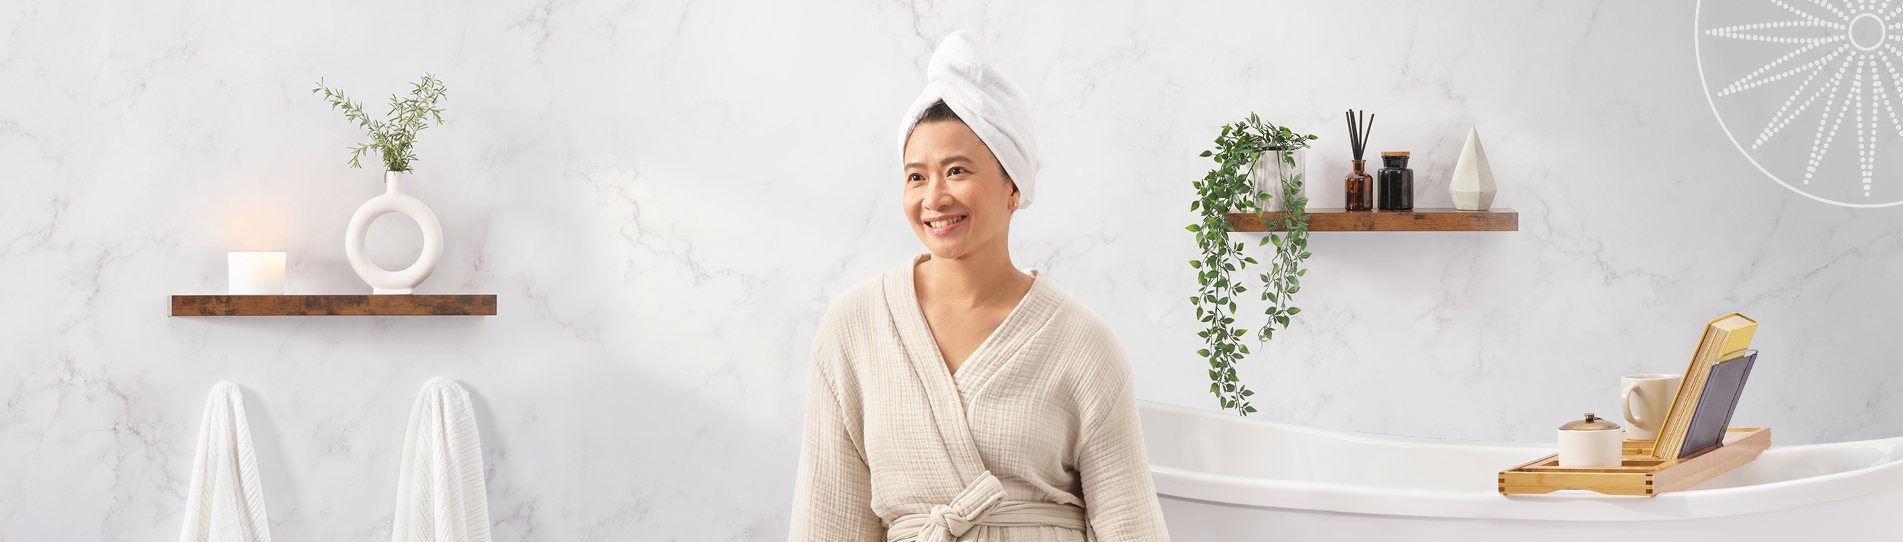 middle-aged Asian woman smiling leaning on her bathtub in her nice new bathroom